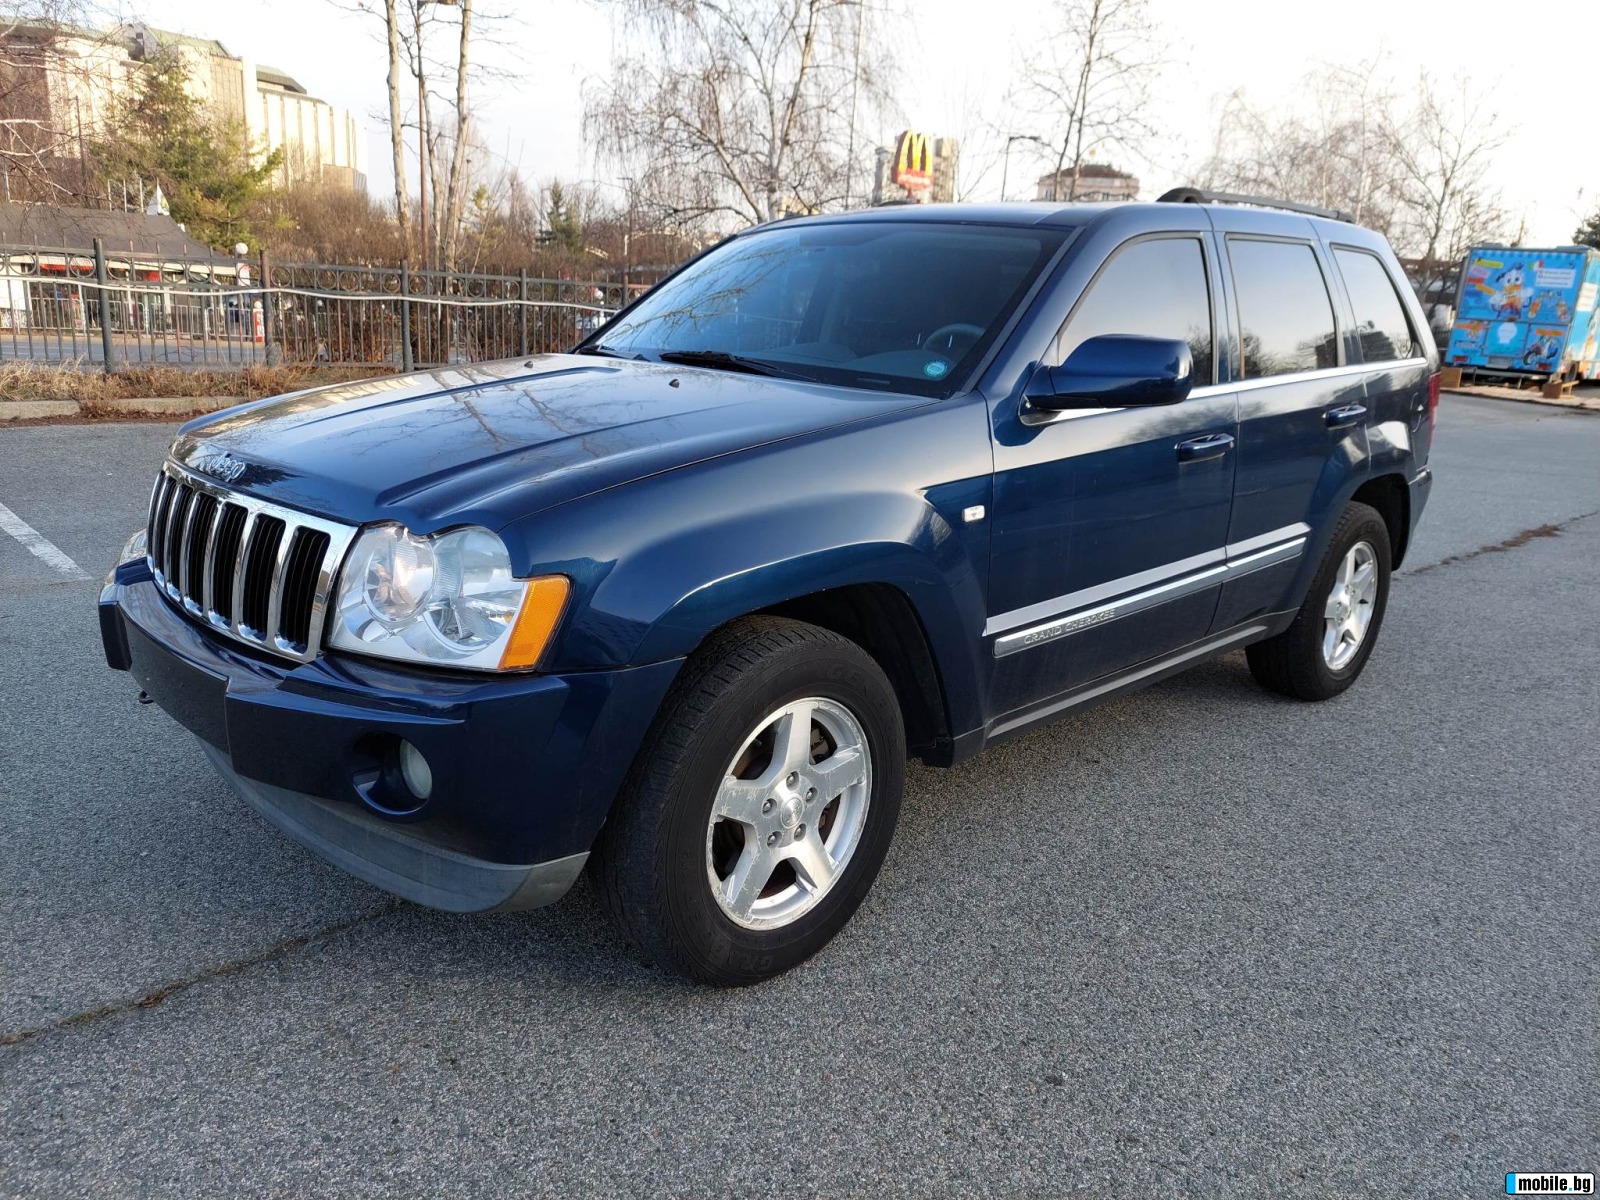 Jeep Grand cherokee 3,0CRD 218ps LIMITED | Mobile.bg   1